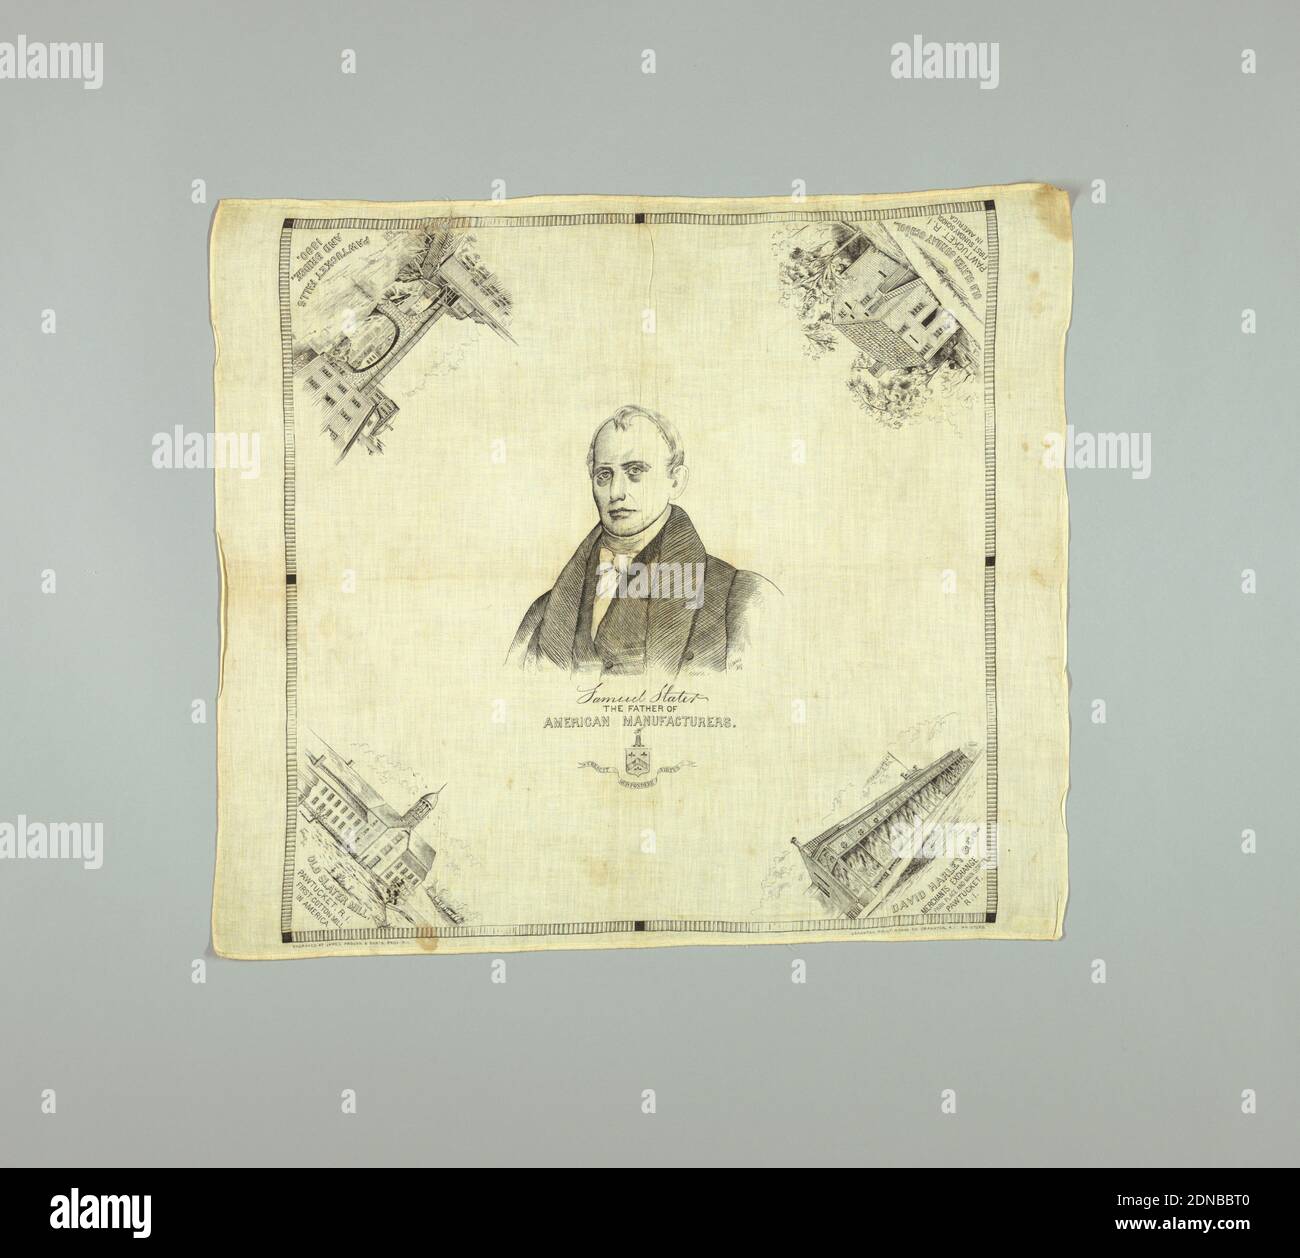 Samuel Slater, The Father of American Manufacturers, Cranston Print Works, (Cranston, RI, USA), Medium: cotton Technique: printed on plain weave, Small border with black lines. The field has a building on each corner with legend underneath. In the center is a portrait with signature and legend, 'SAMUEL STARTER / THE FATHER OF / AMERICAN MANUFACTURERS' and seal., Selvedge on both sides and hemmed top and bottom., Cranston, Rhode Island, USA, ca. 1890, printed, dyed & painted textiles, Handkerchief, Handkerchief Stock Photo